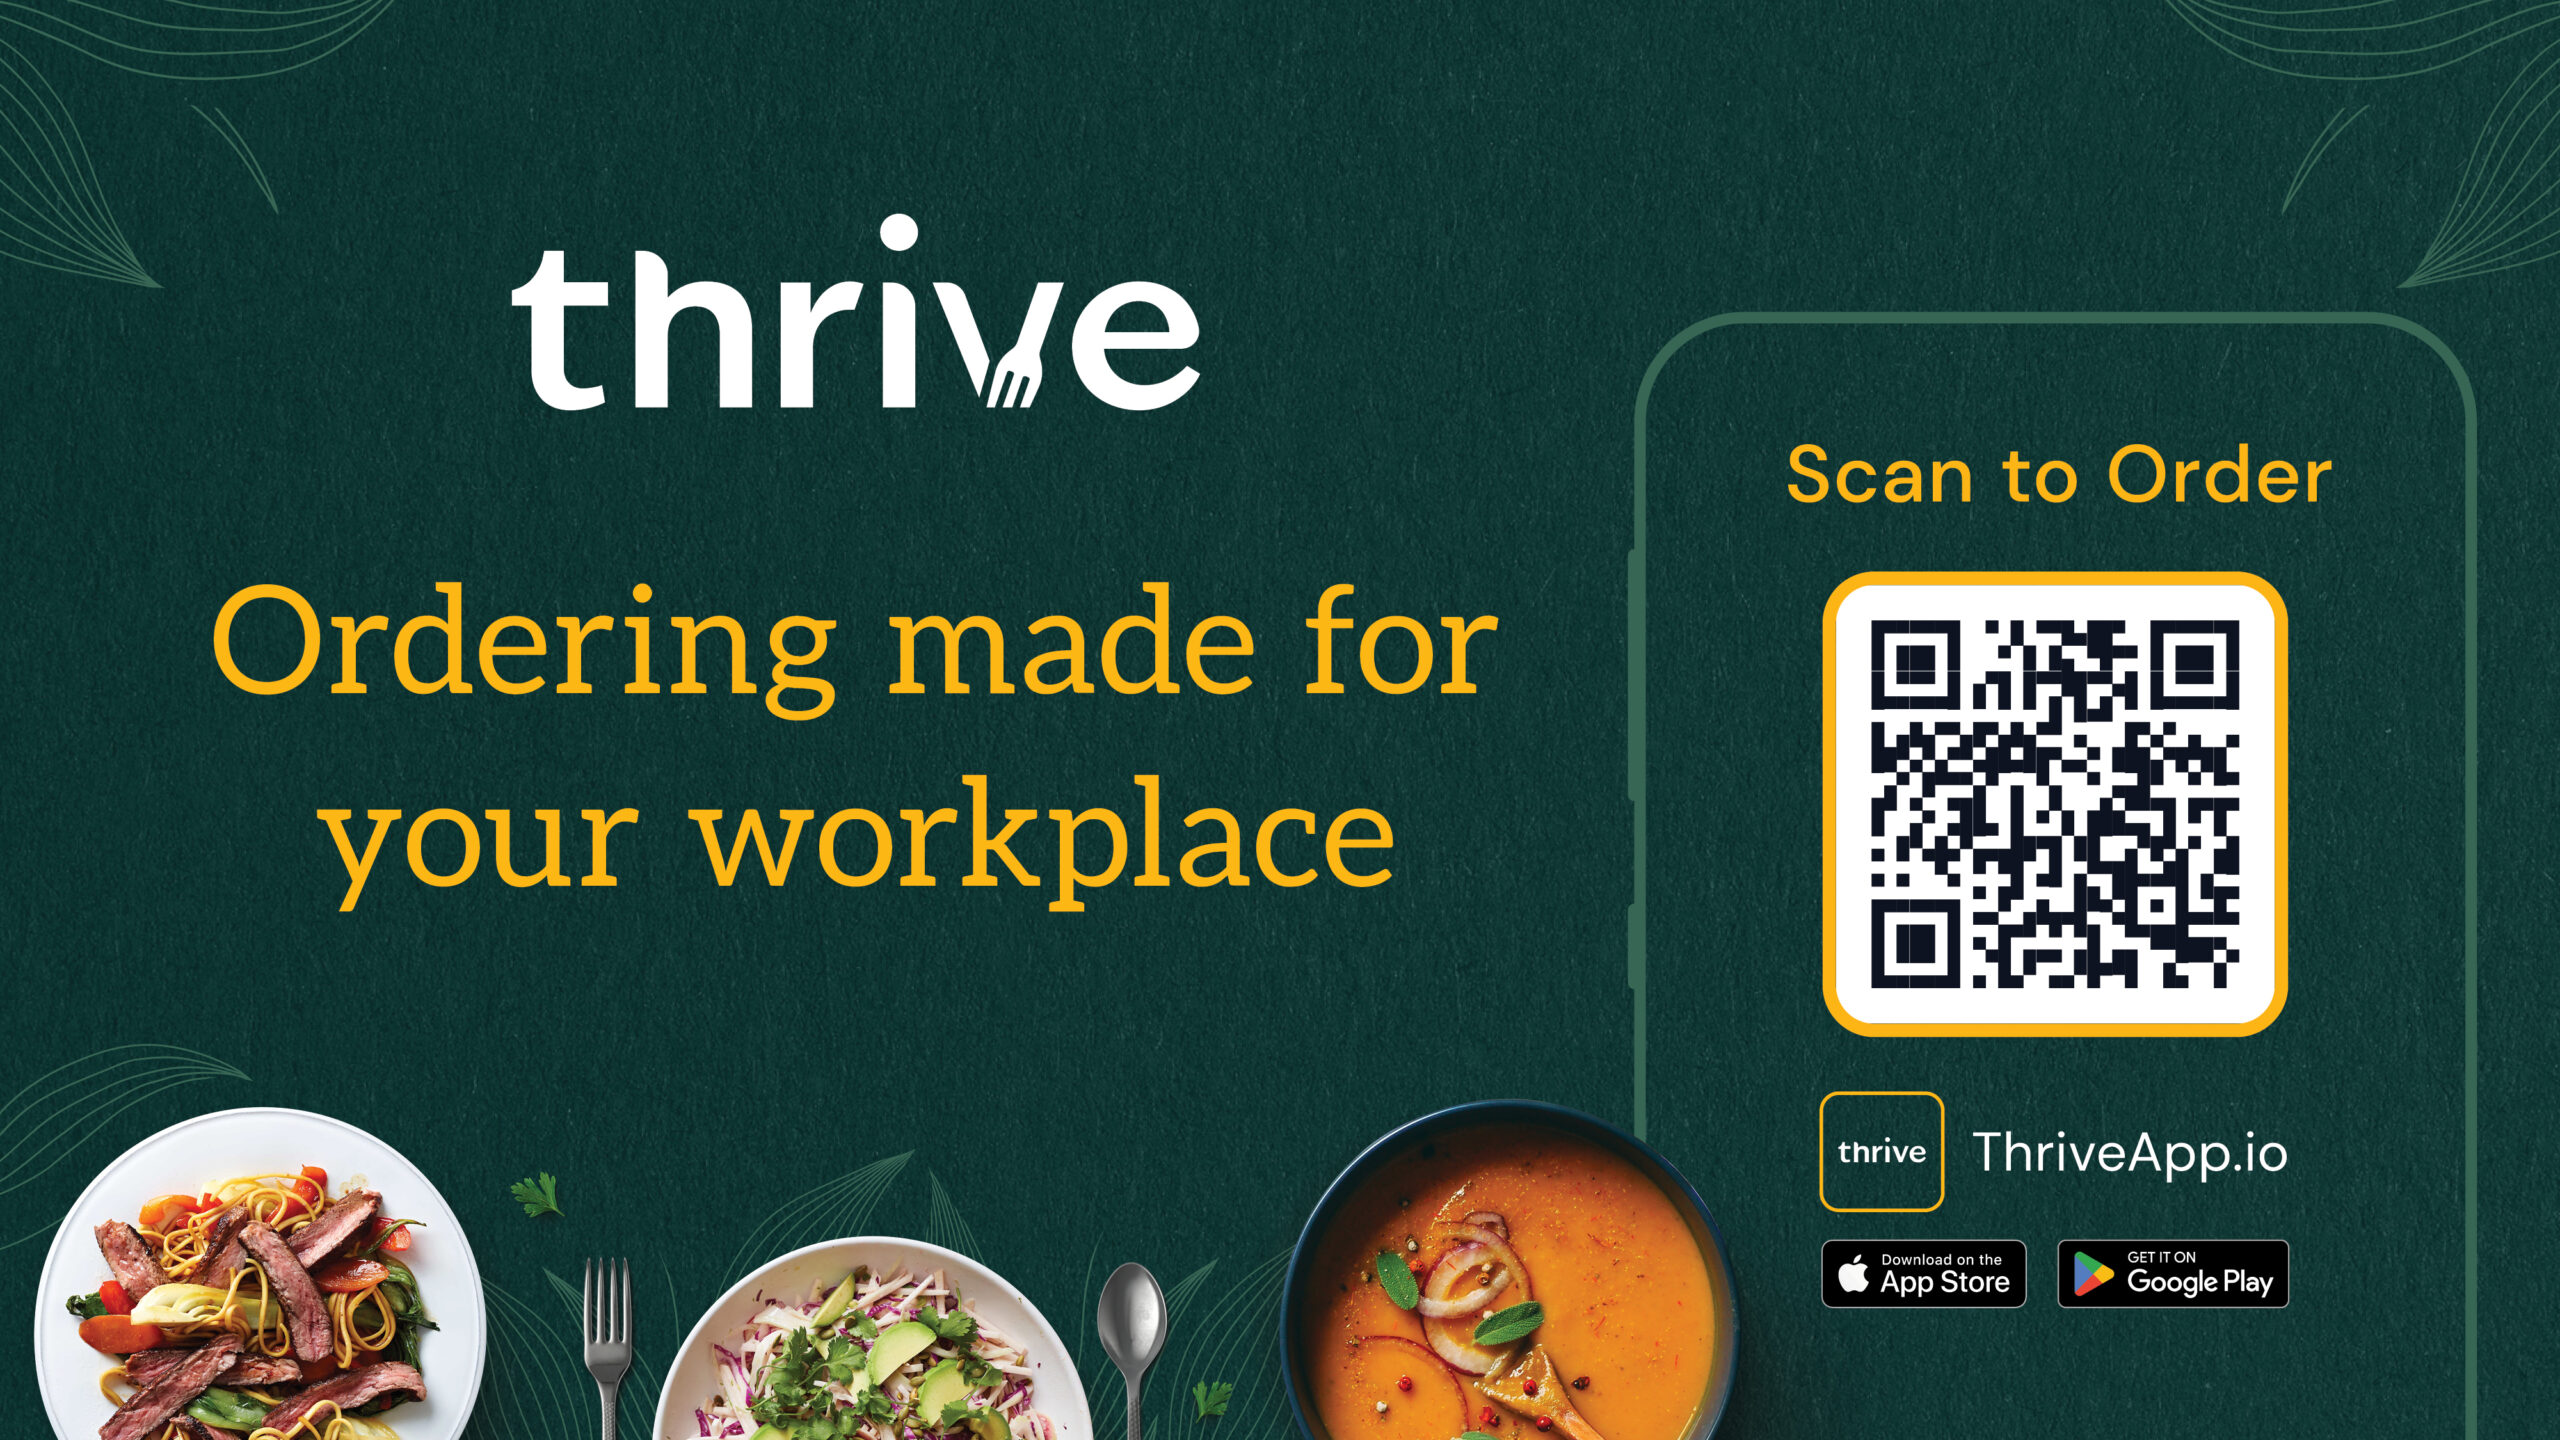 Thrive Ordering made for your workplace. Scan code to order